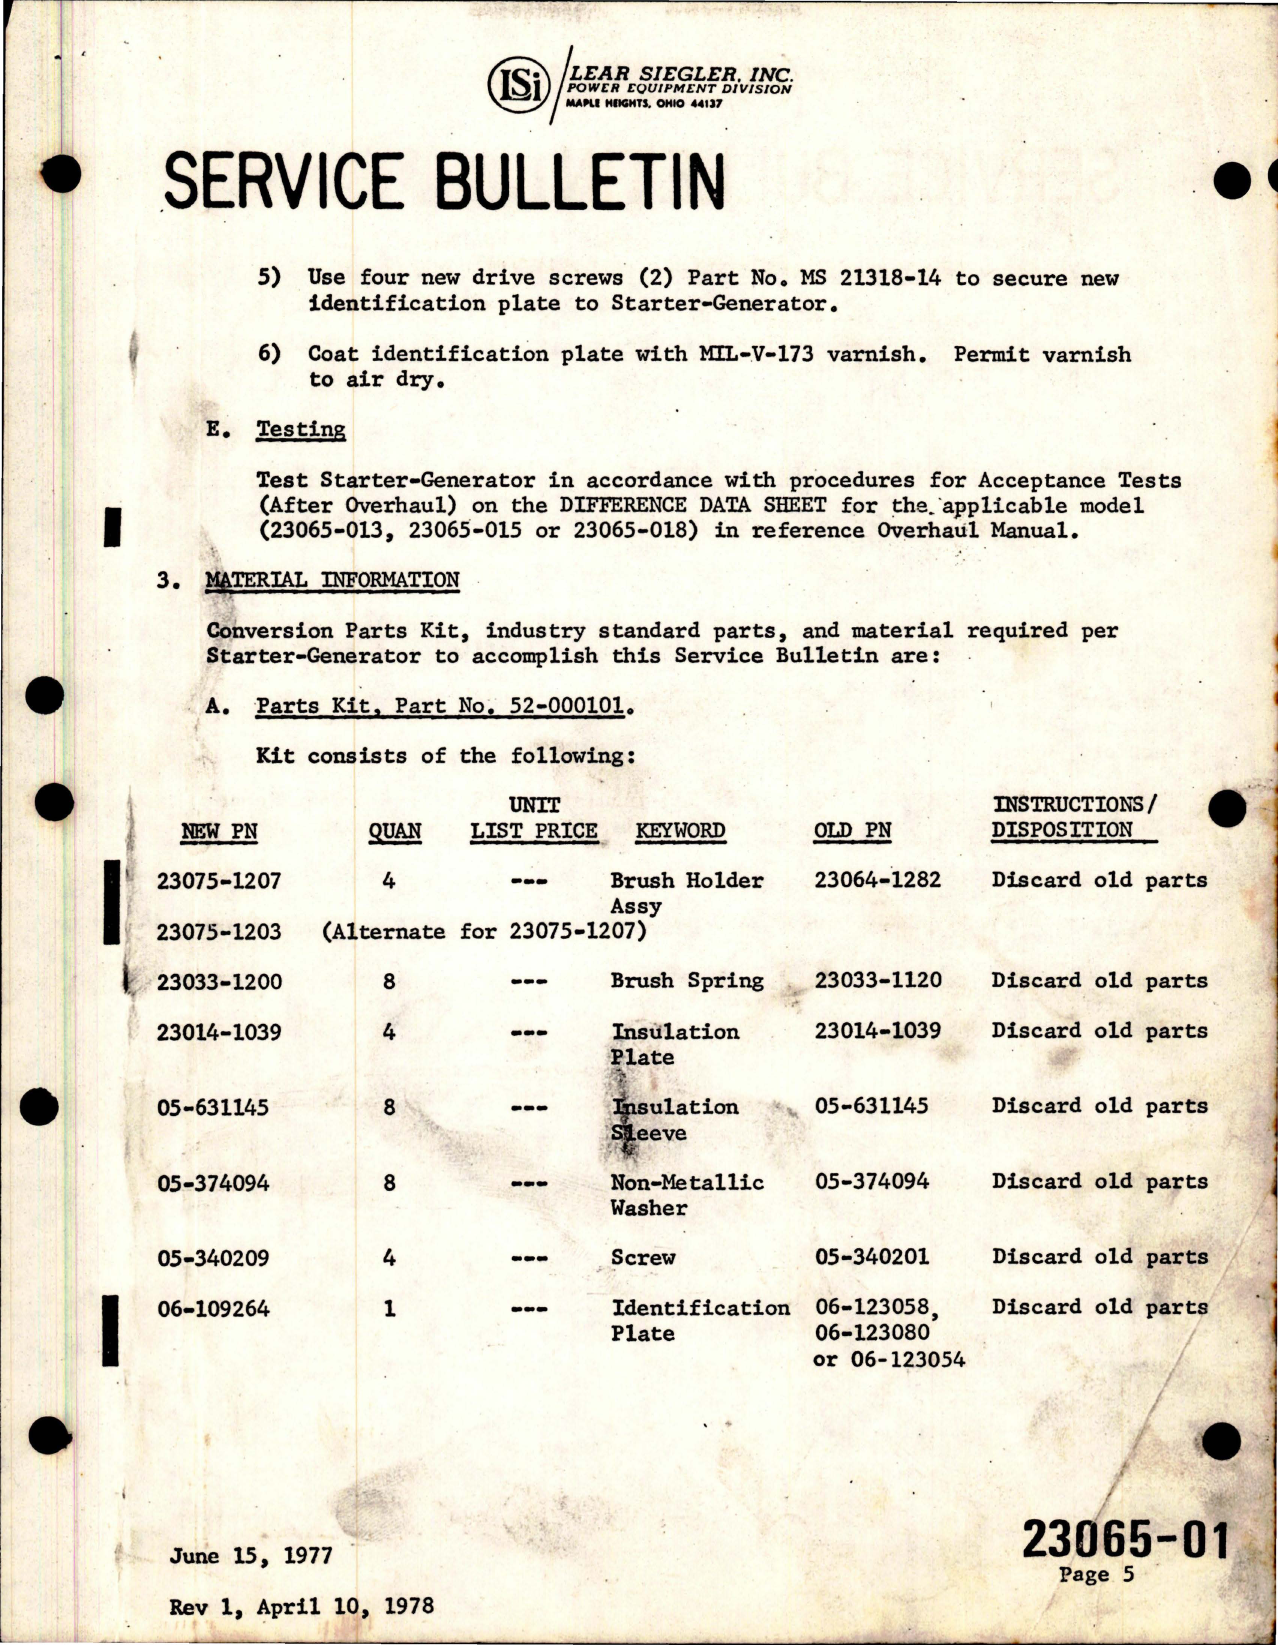 Sample page 5 from AirCorps Library document: Service Bulletin for Starter Generator - Revision 1